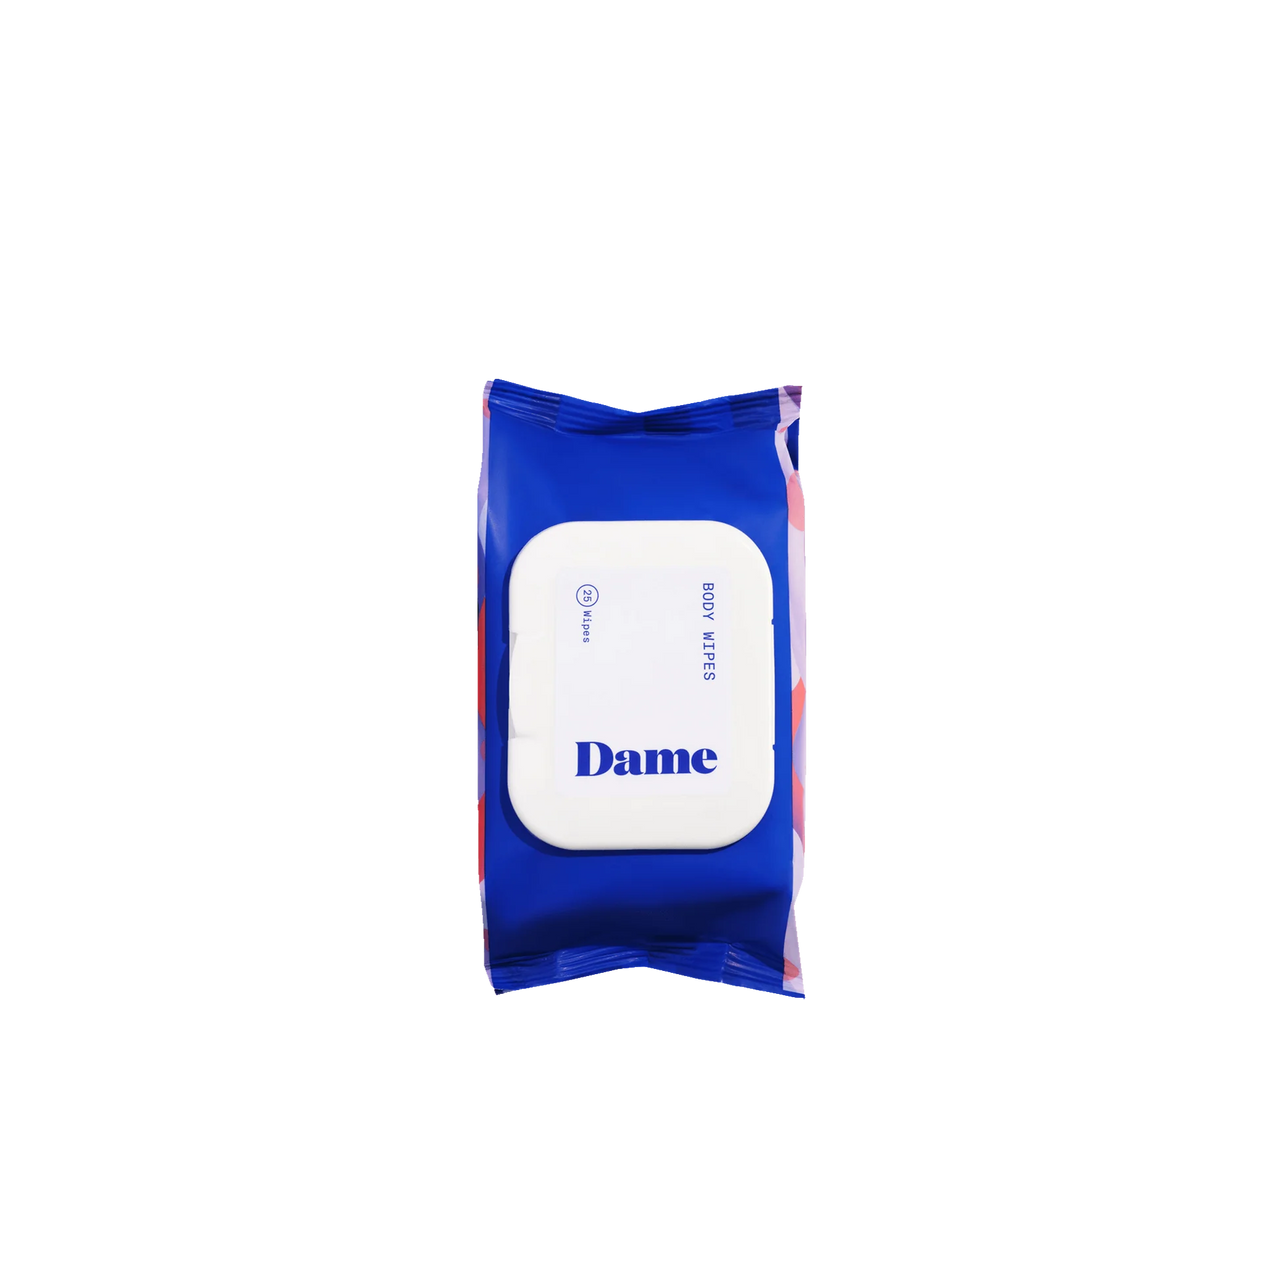 Dame Body Wipes - Pack of 25